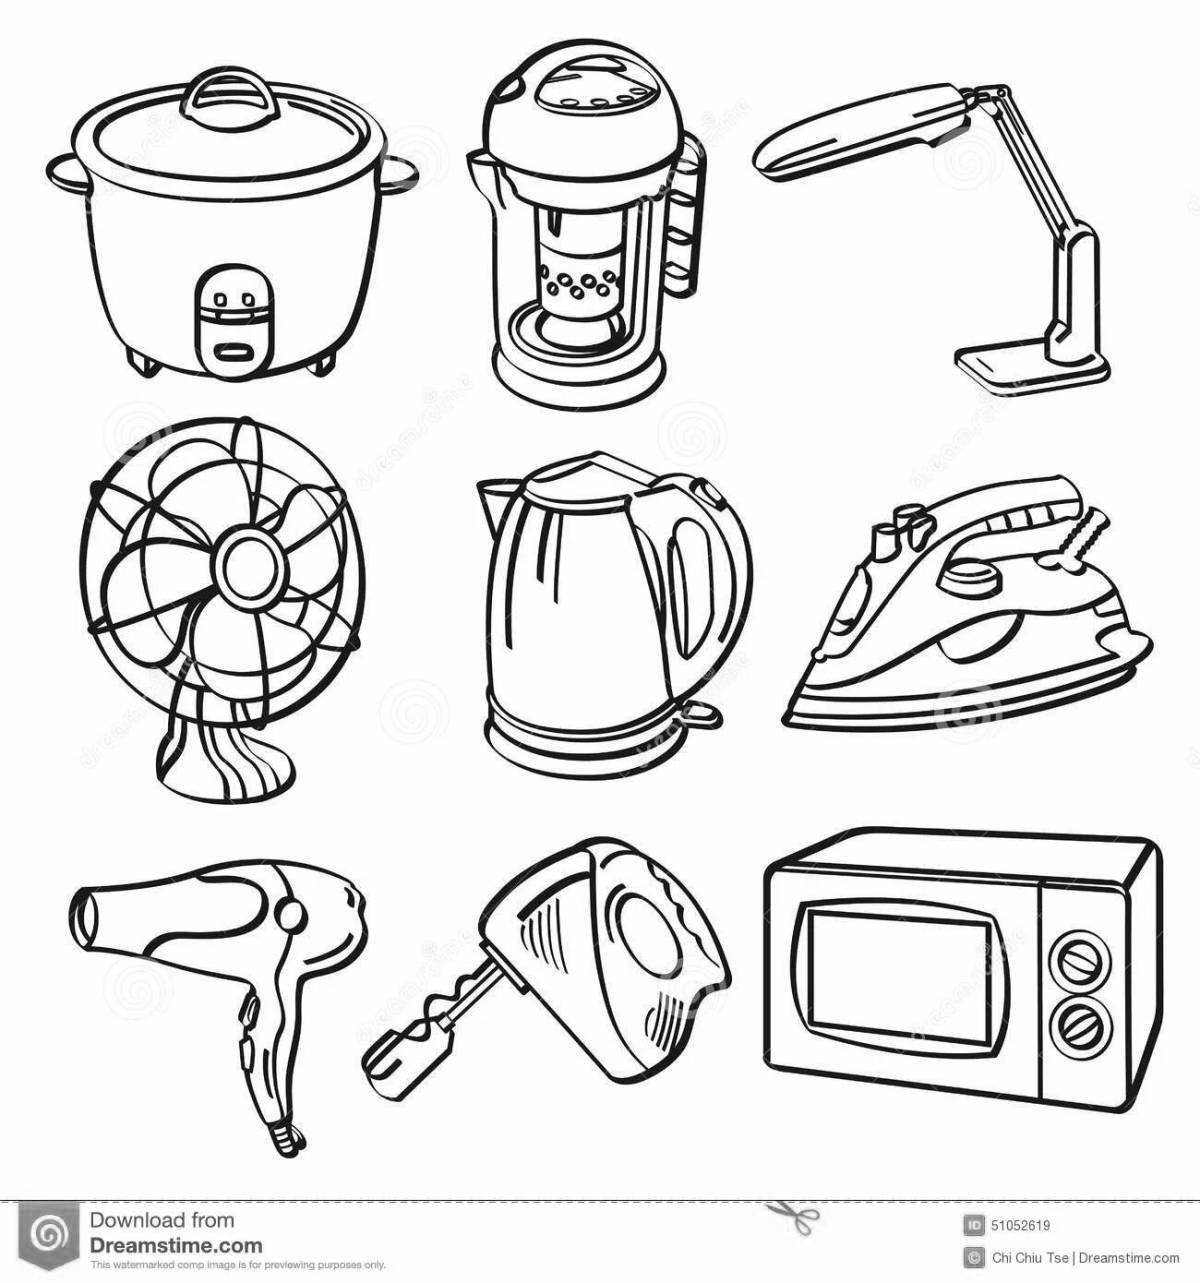 Joyful household appliances coloring book for children 3-4 years old